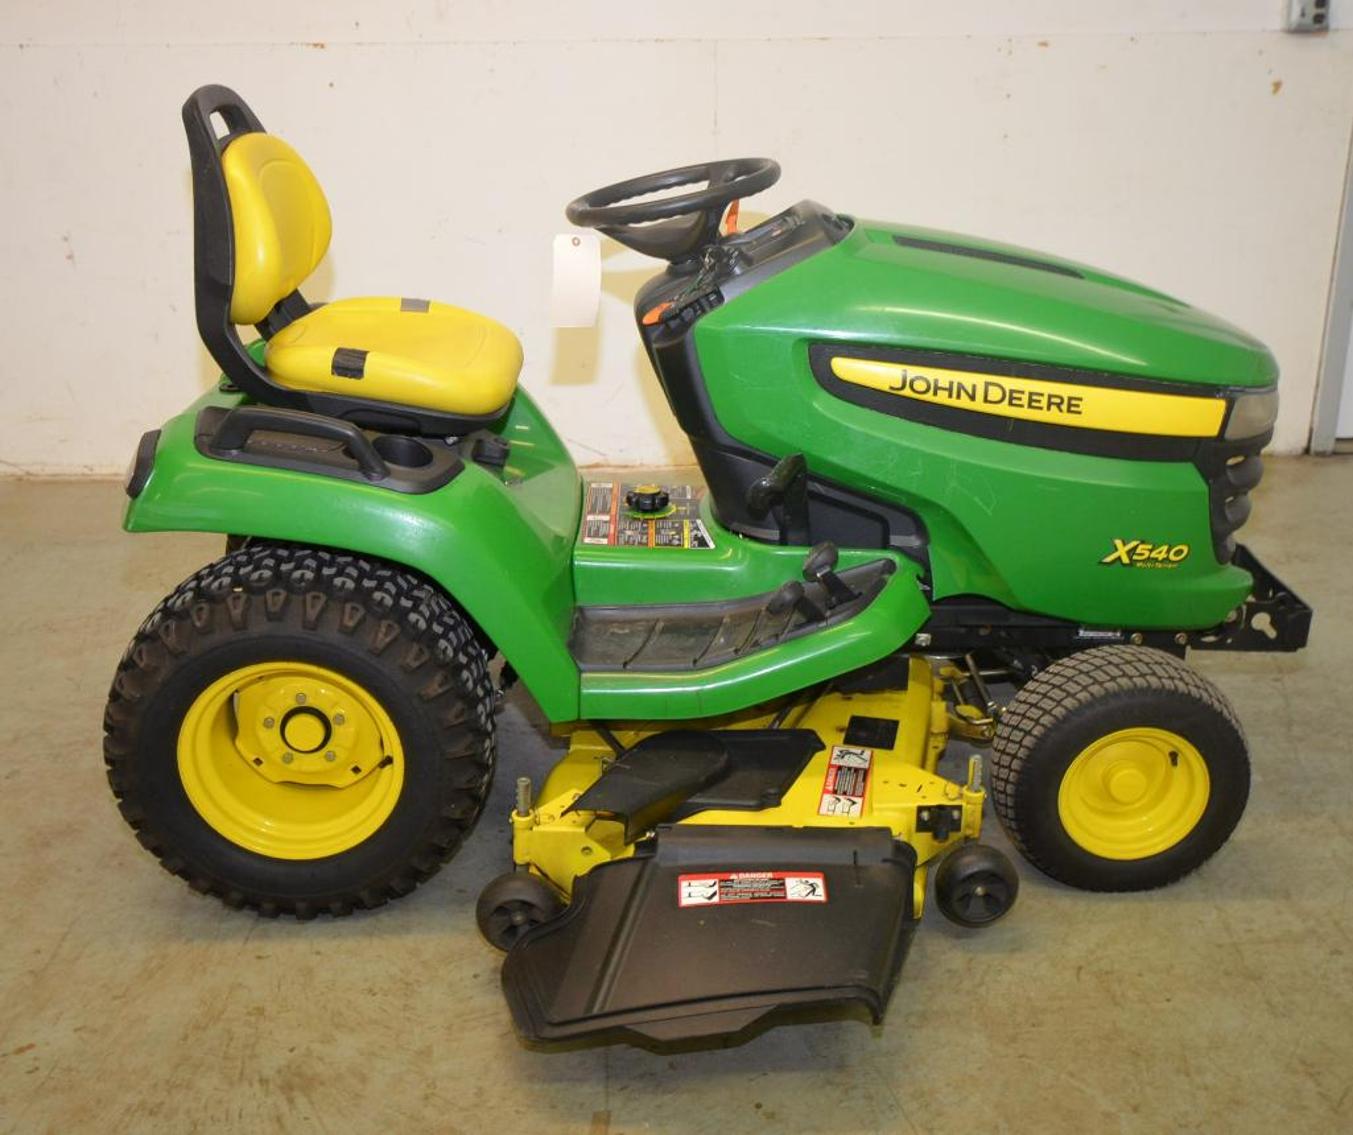 JD Lawn Tractor, Polaris ATV, Wood Working Equipment, Furniture and Much More!!